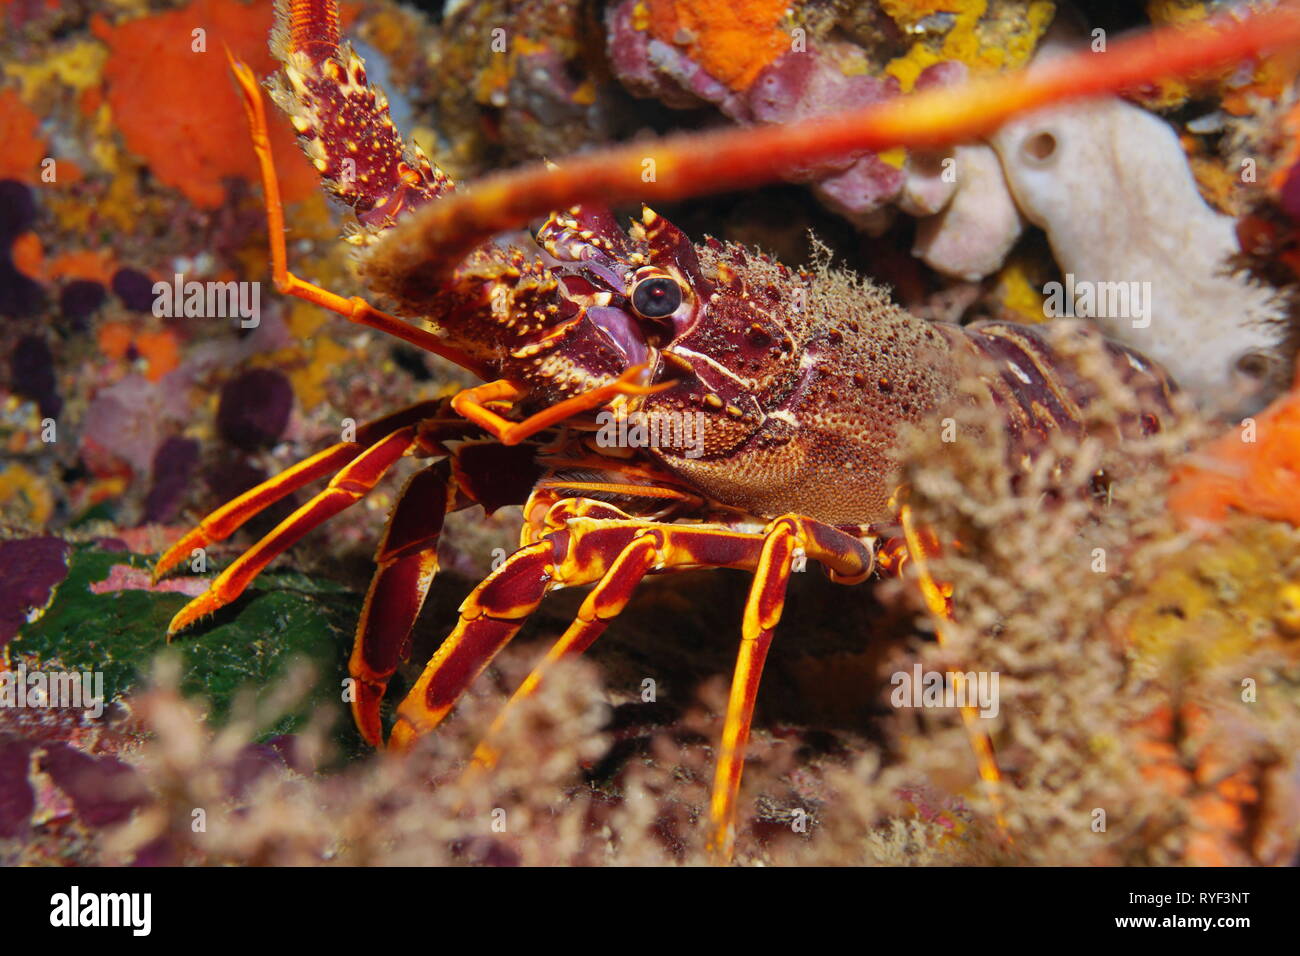 A spiny lobster Palinurus elephas underwater in the Mediterranean sea, France Stock Photo